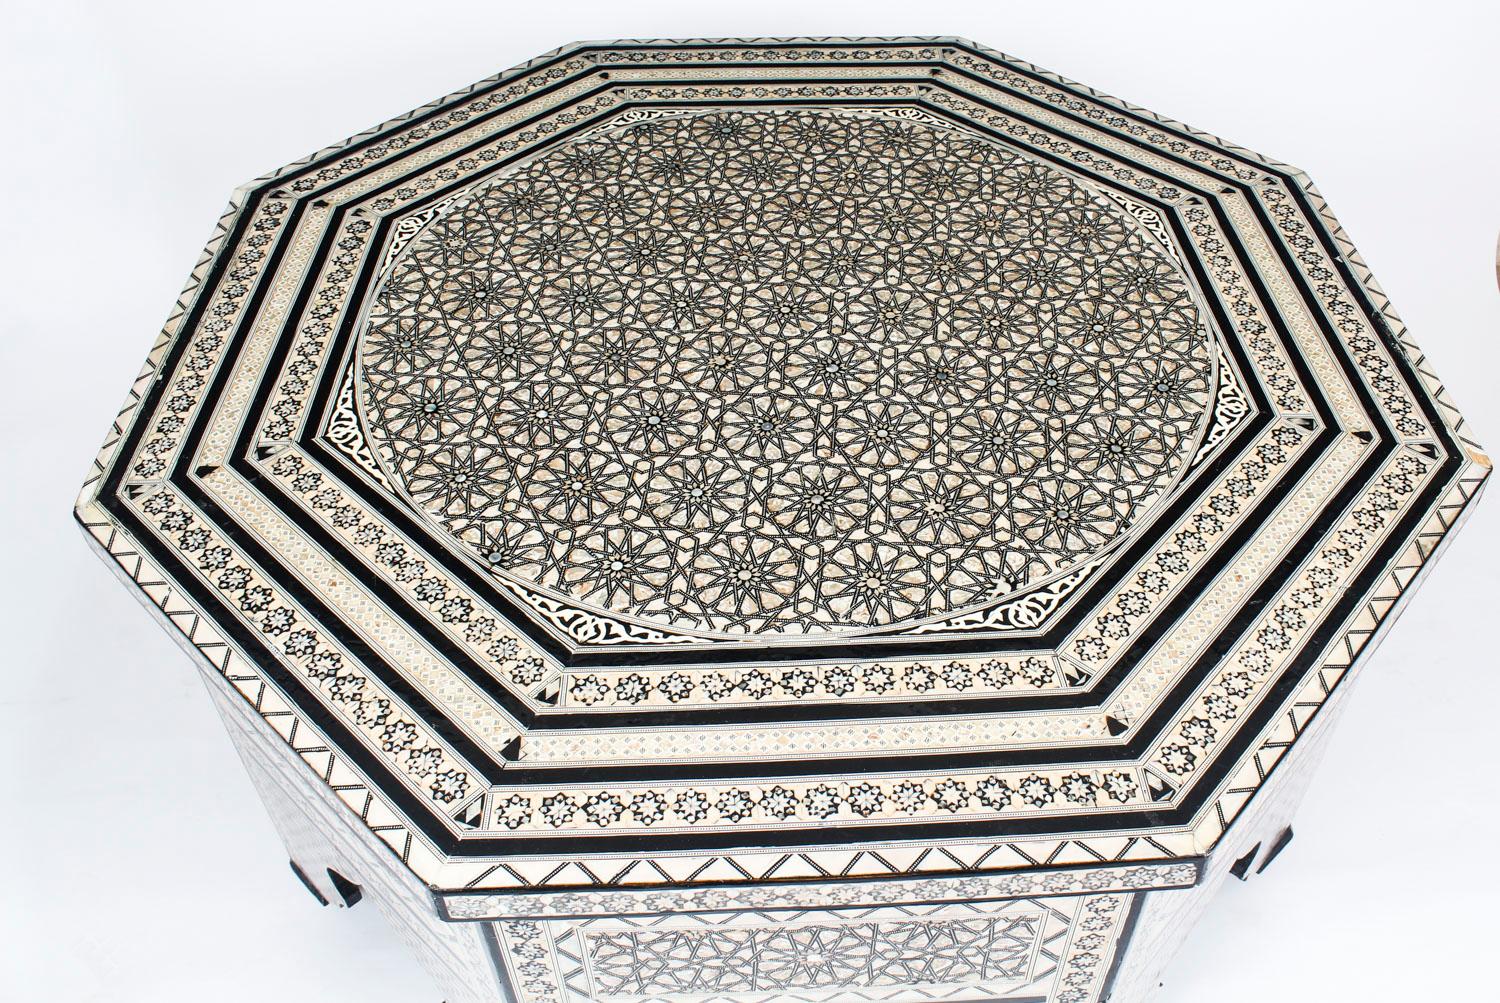 This is a superb intricately inlaid mother of pearl Damascus centre table or coffee table, dating the mid-20th century.

The octagonally shaped table features beautifully detailed inlaid mother of pearl parquetry in interlocking patterns all